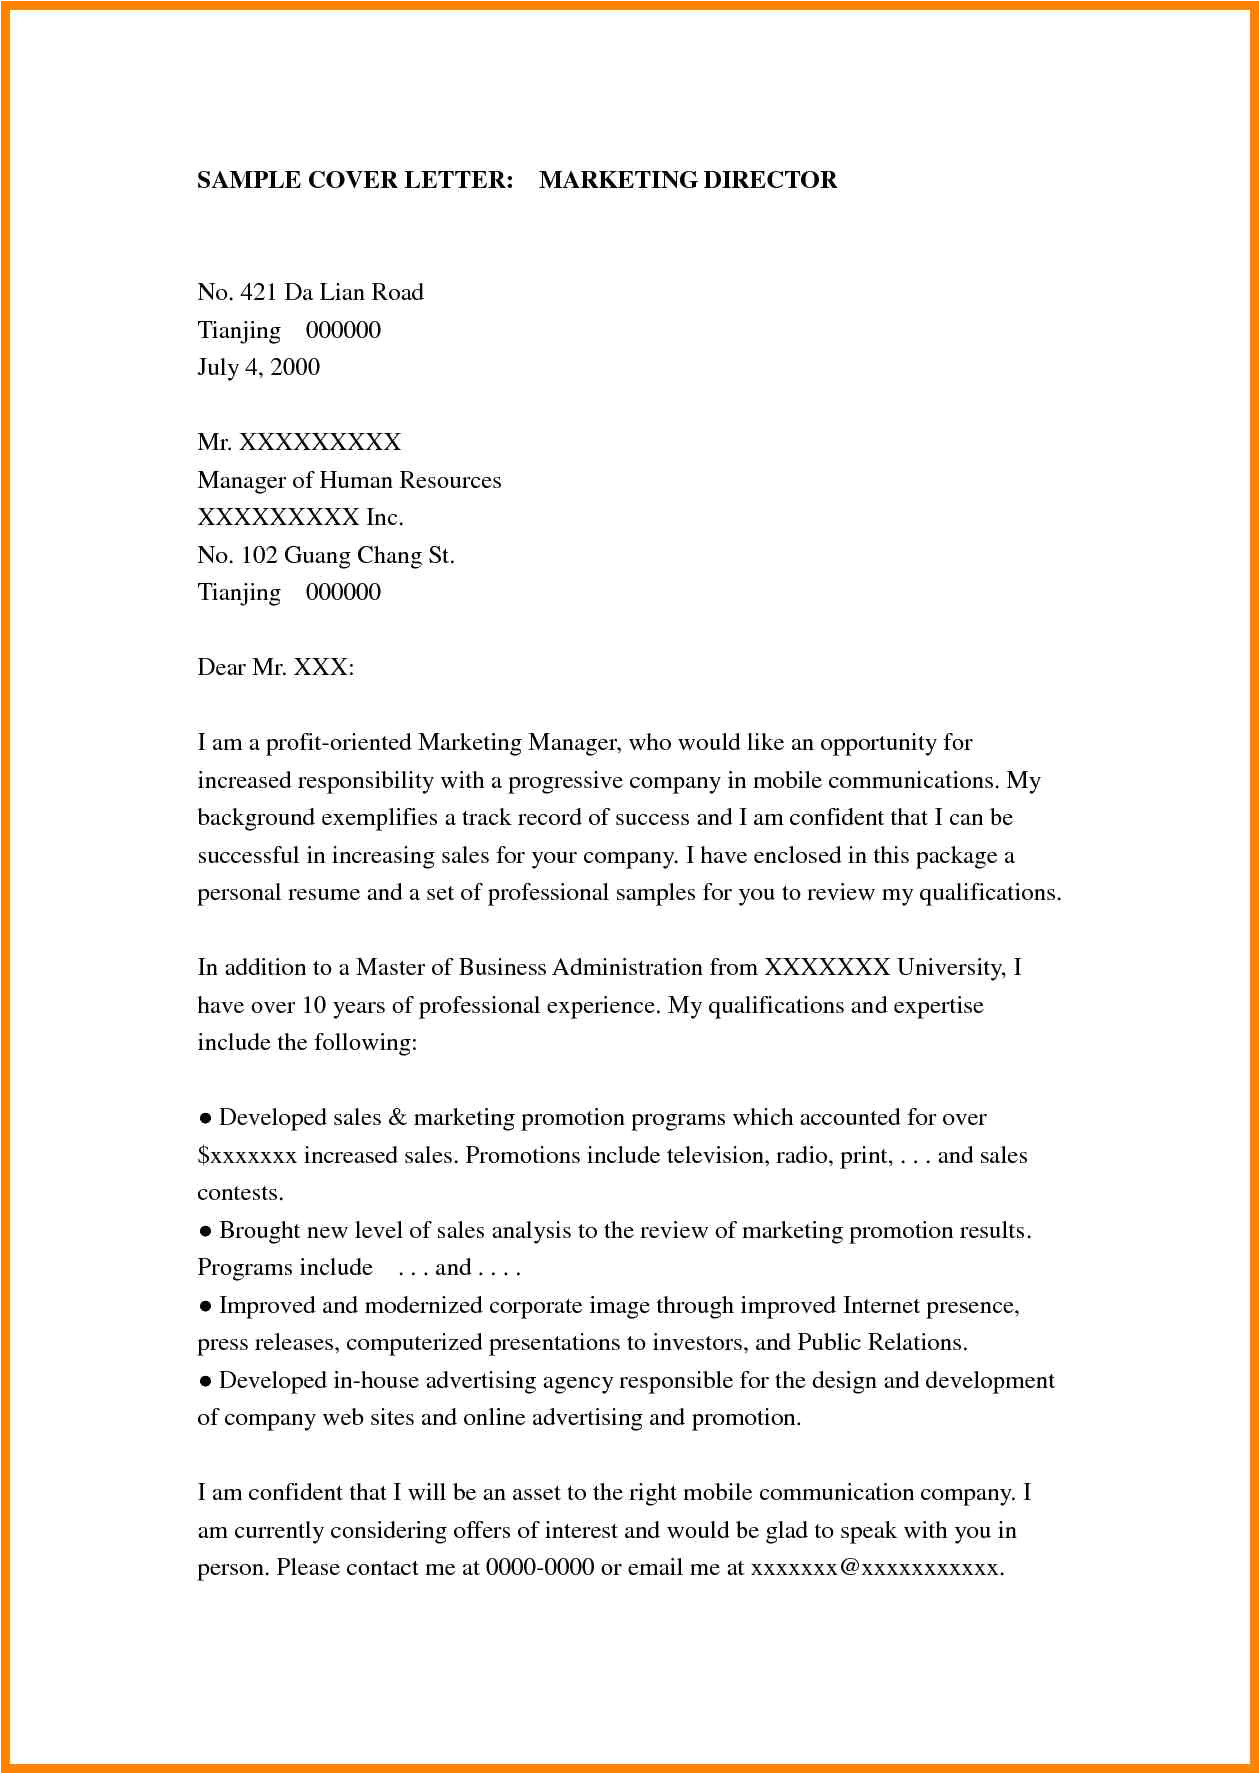 7 creative cover letter for advertising agency